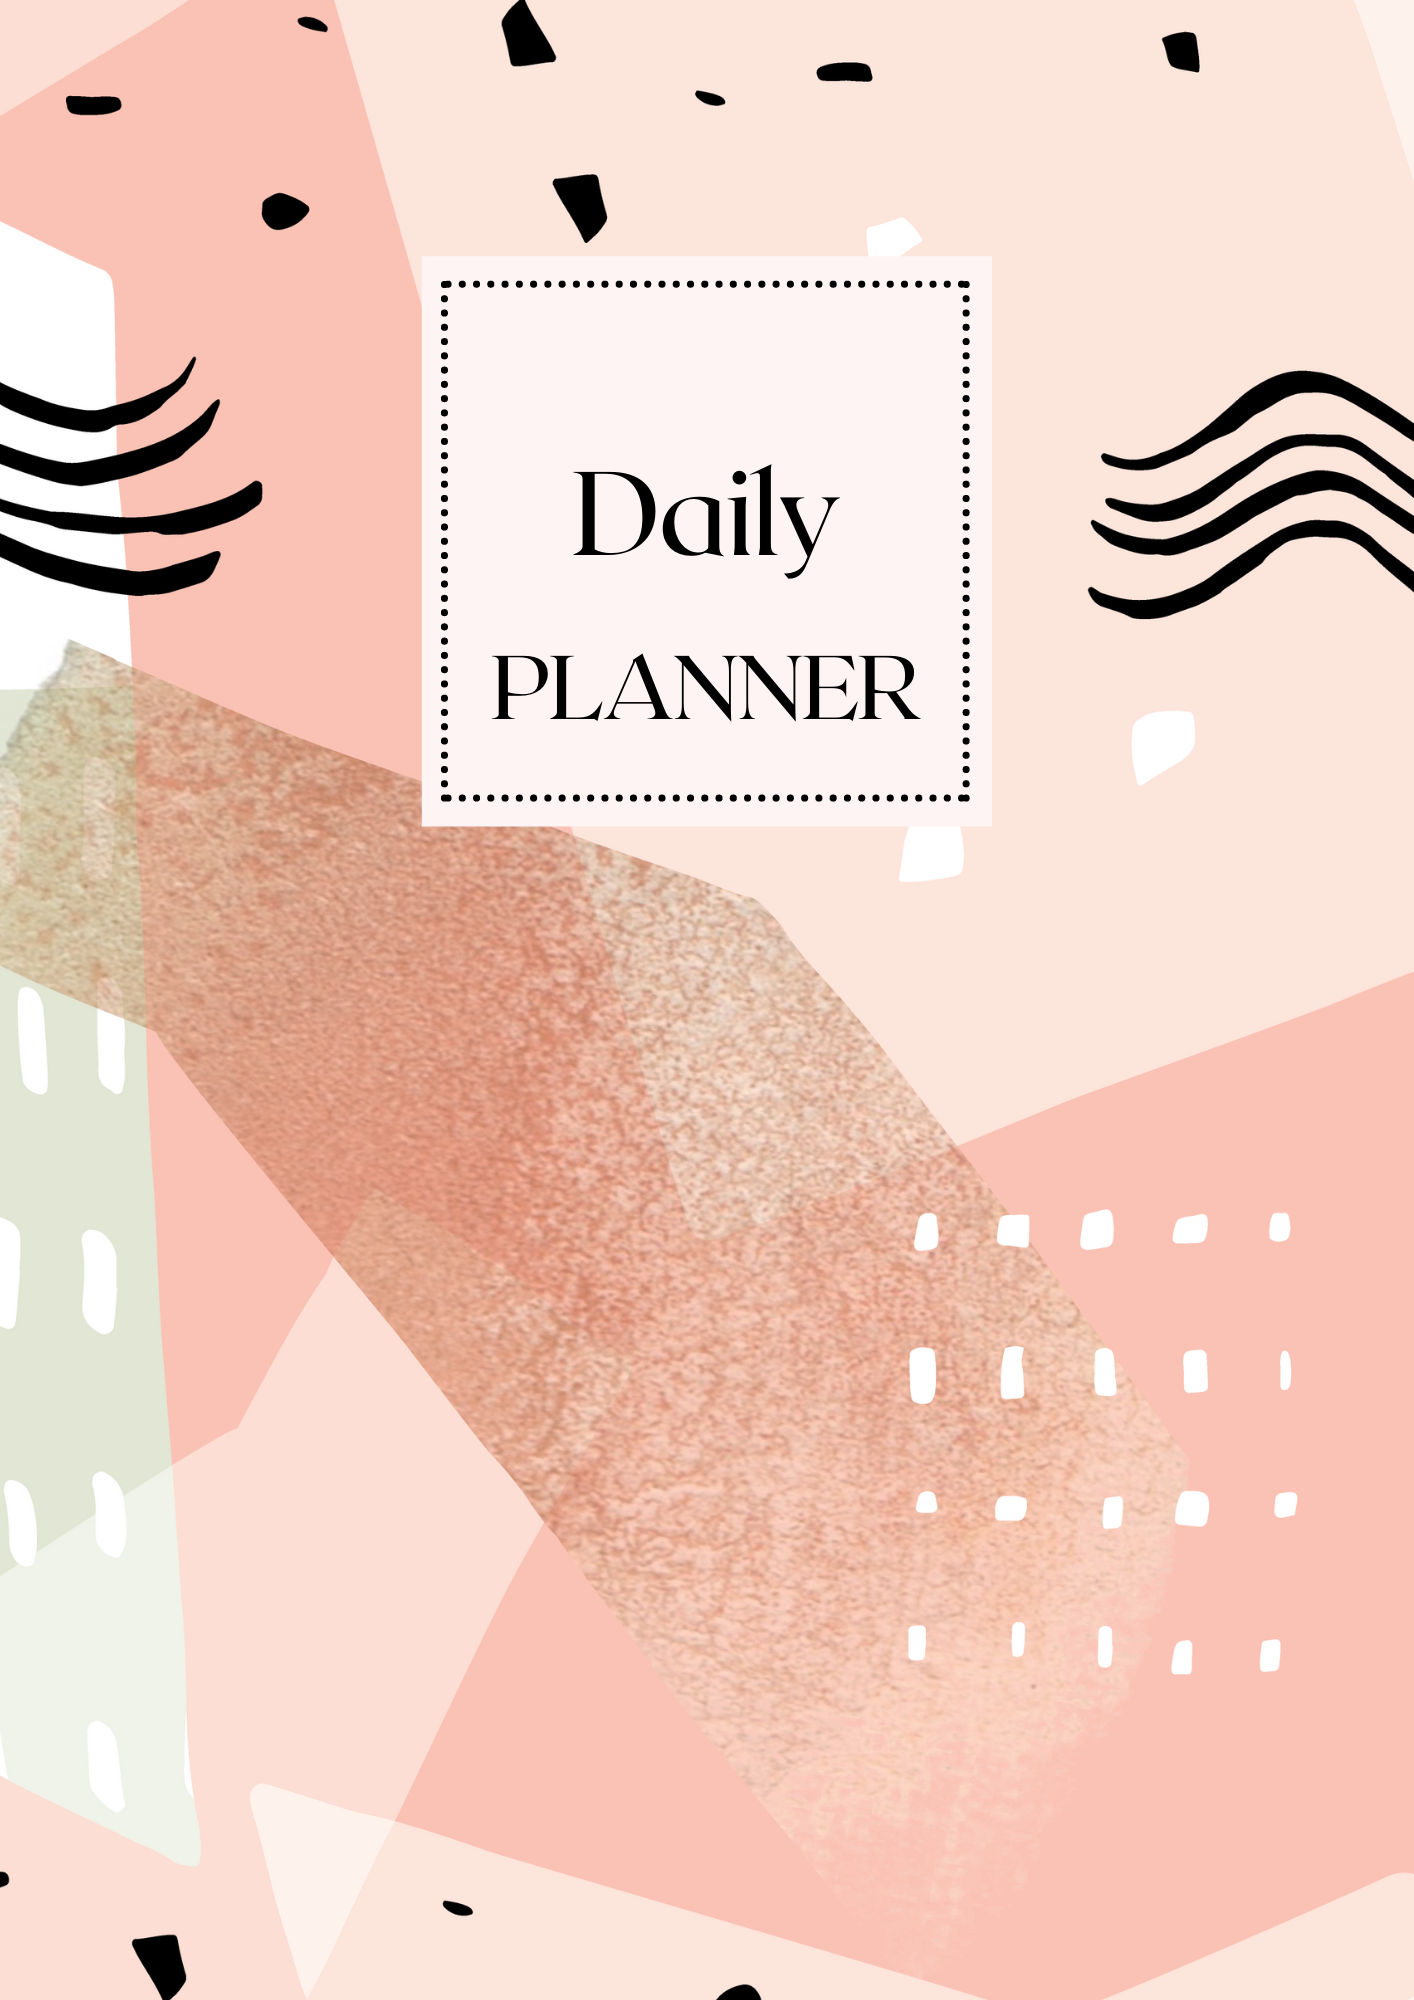 My Daily Planner Appointment Book - pdf printout (DIGITAL DOWNLOAD ONLY)